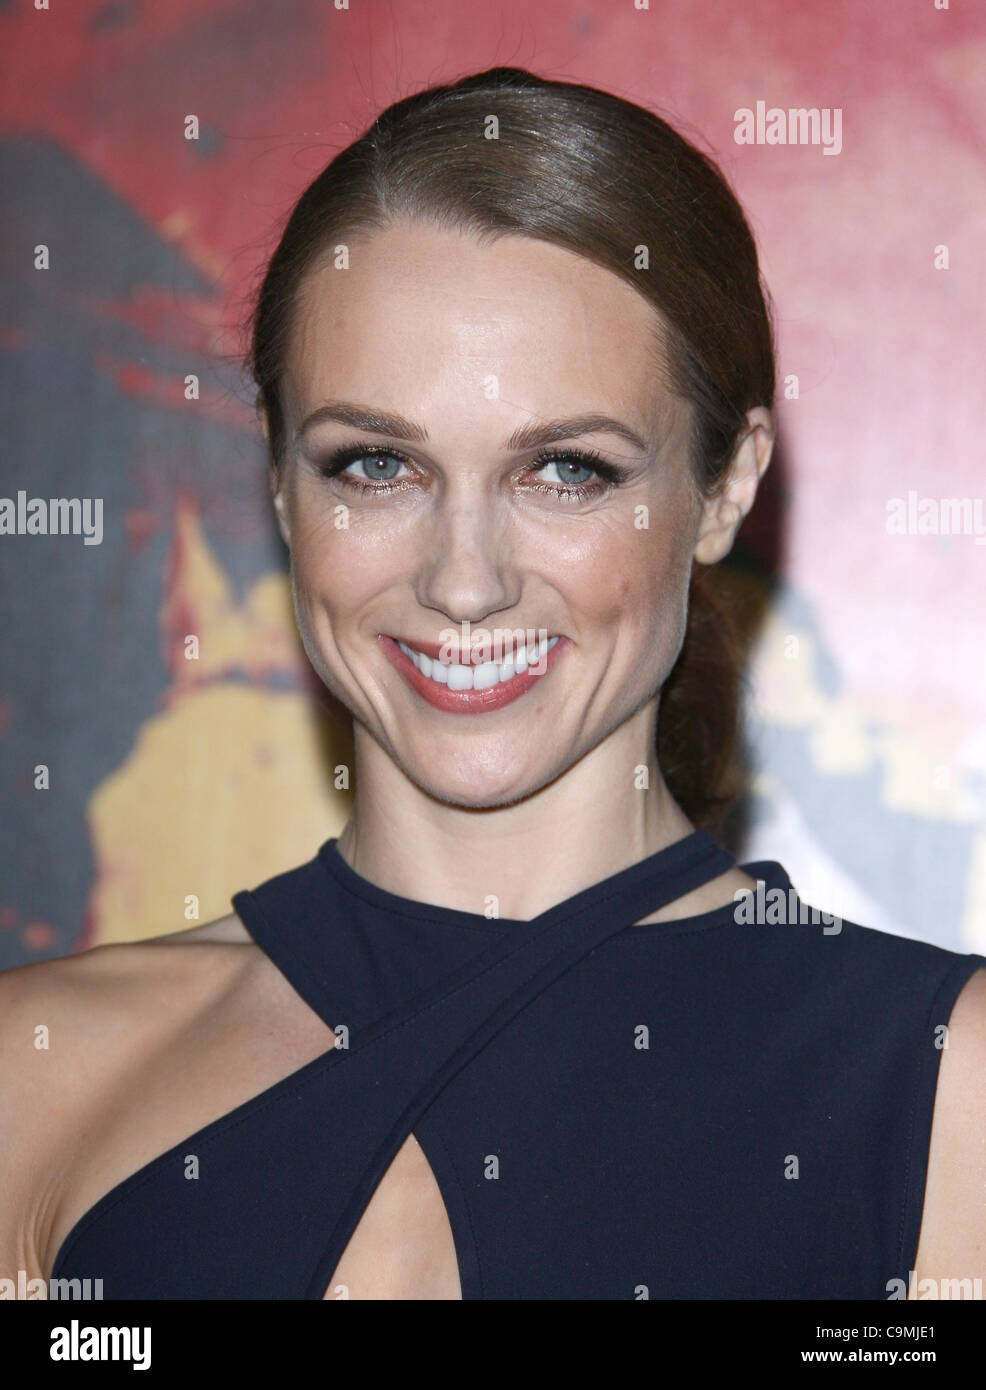 KERRY CONDON LUCK. HBO SERIES PREMIERE HOLLYWOOD LOS ANGELES CALIFORNIA USA 25 January 2012 Stock Photo